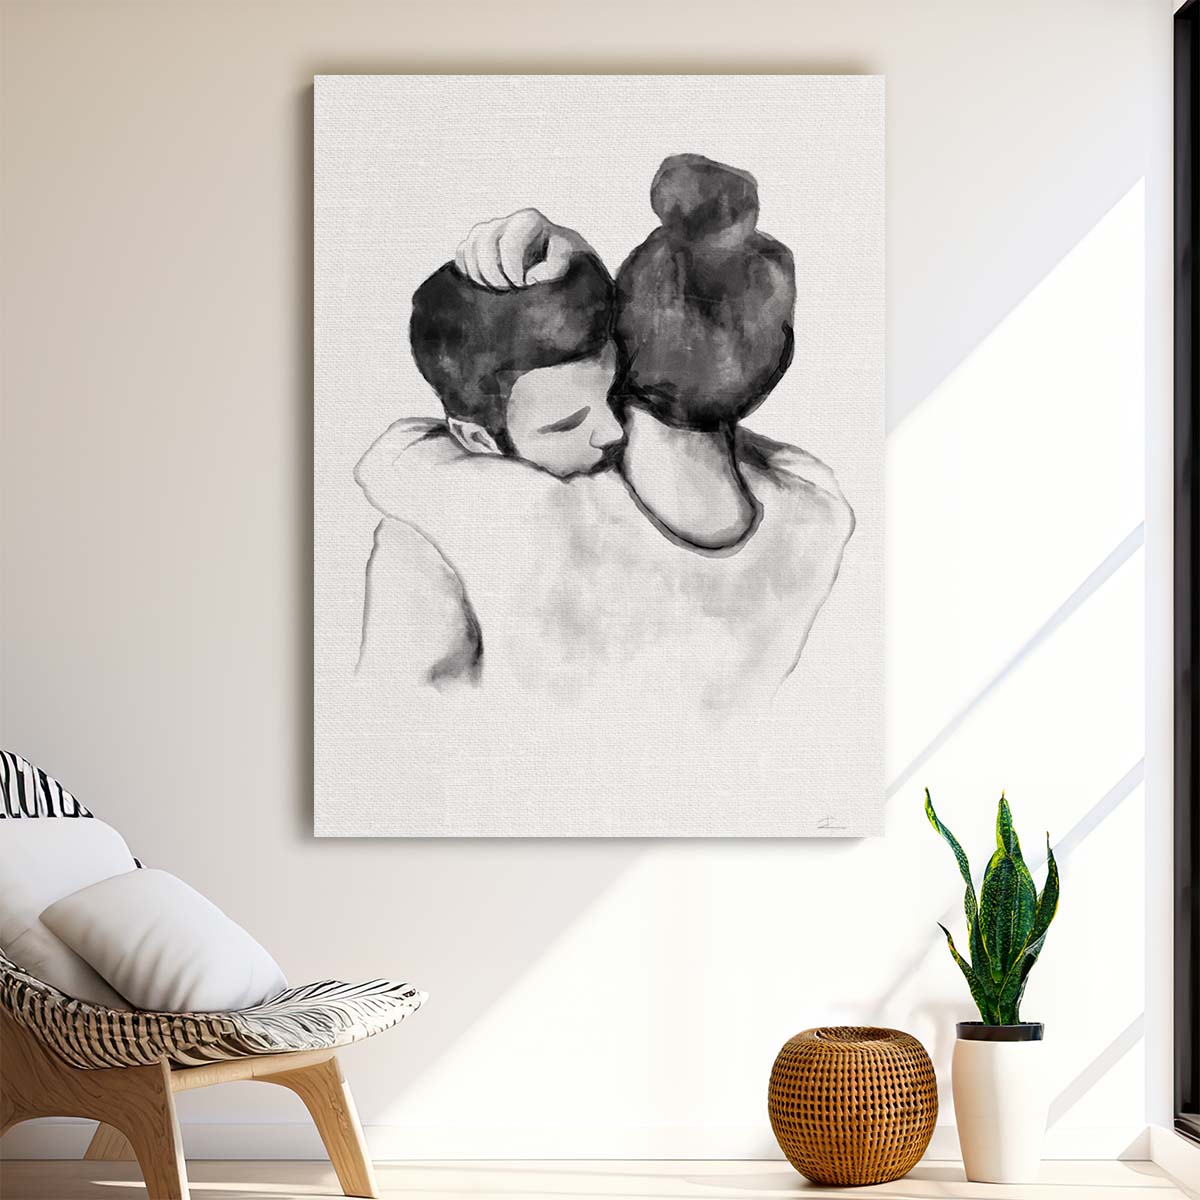 Romantic Couple Embrace Watercolor Illustration in Monochrome by Luxuriance Designs, made in USA